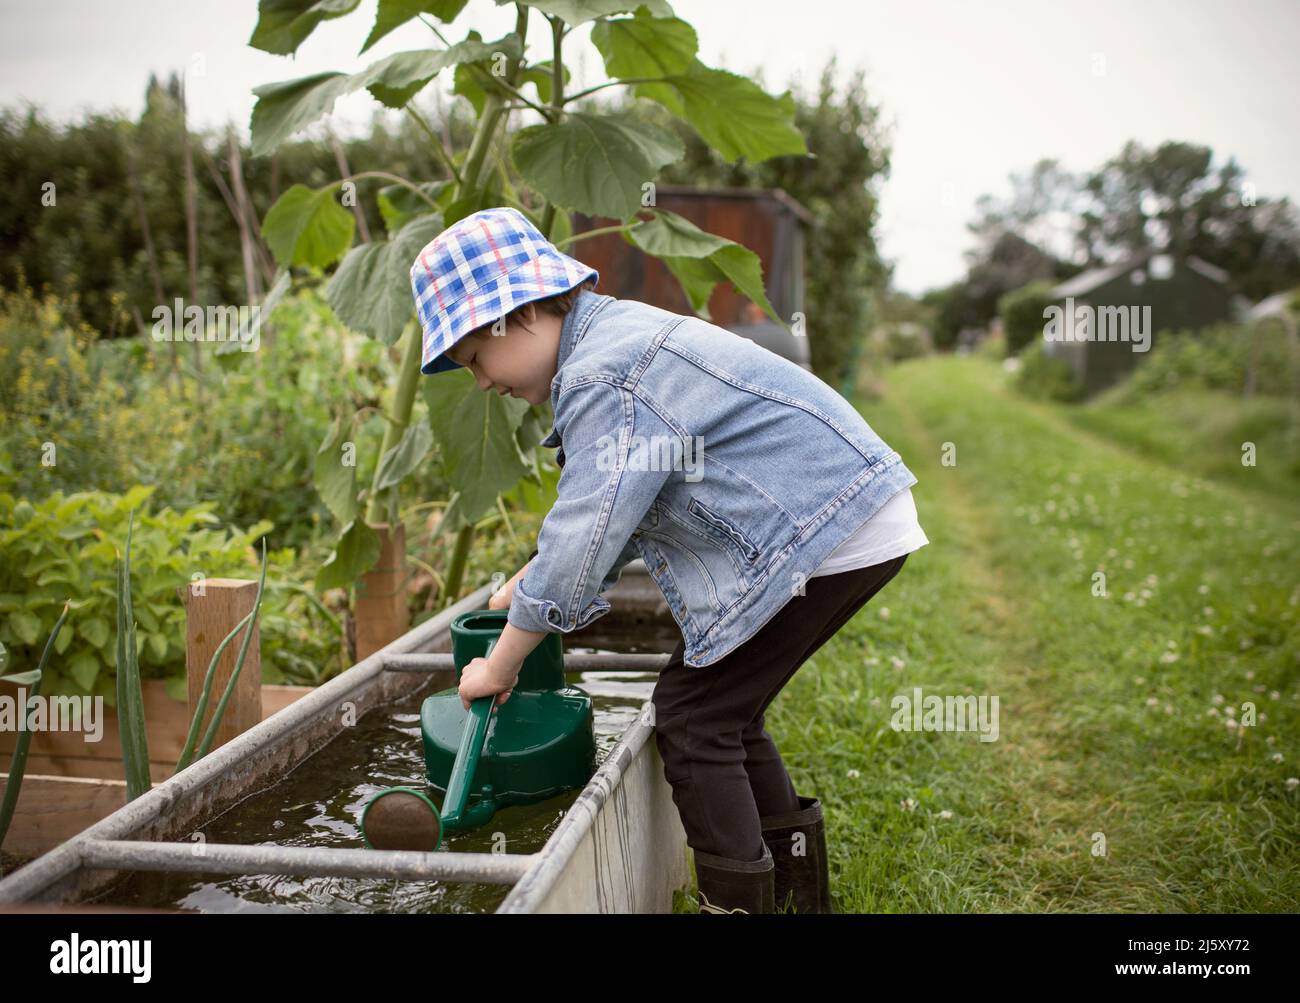 Boy filing watering can at trough in garden Stock Photo